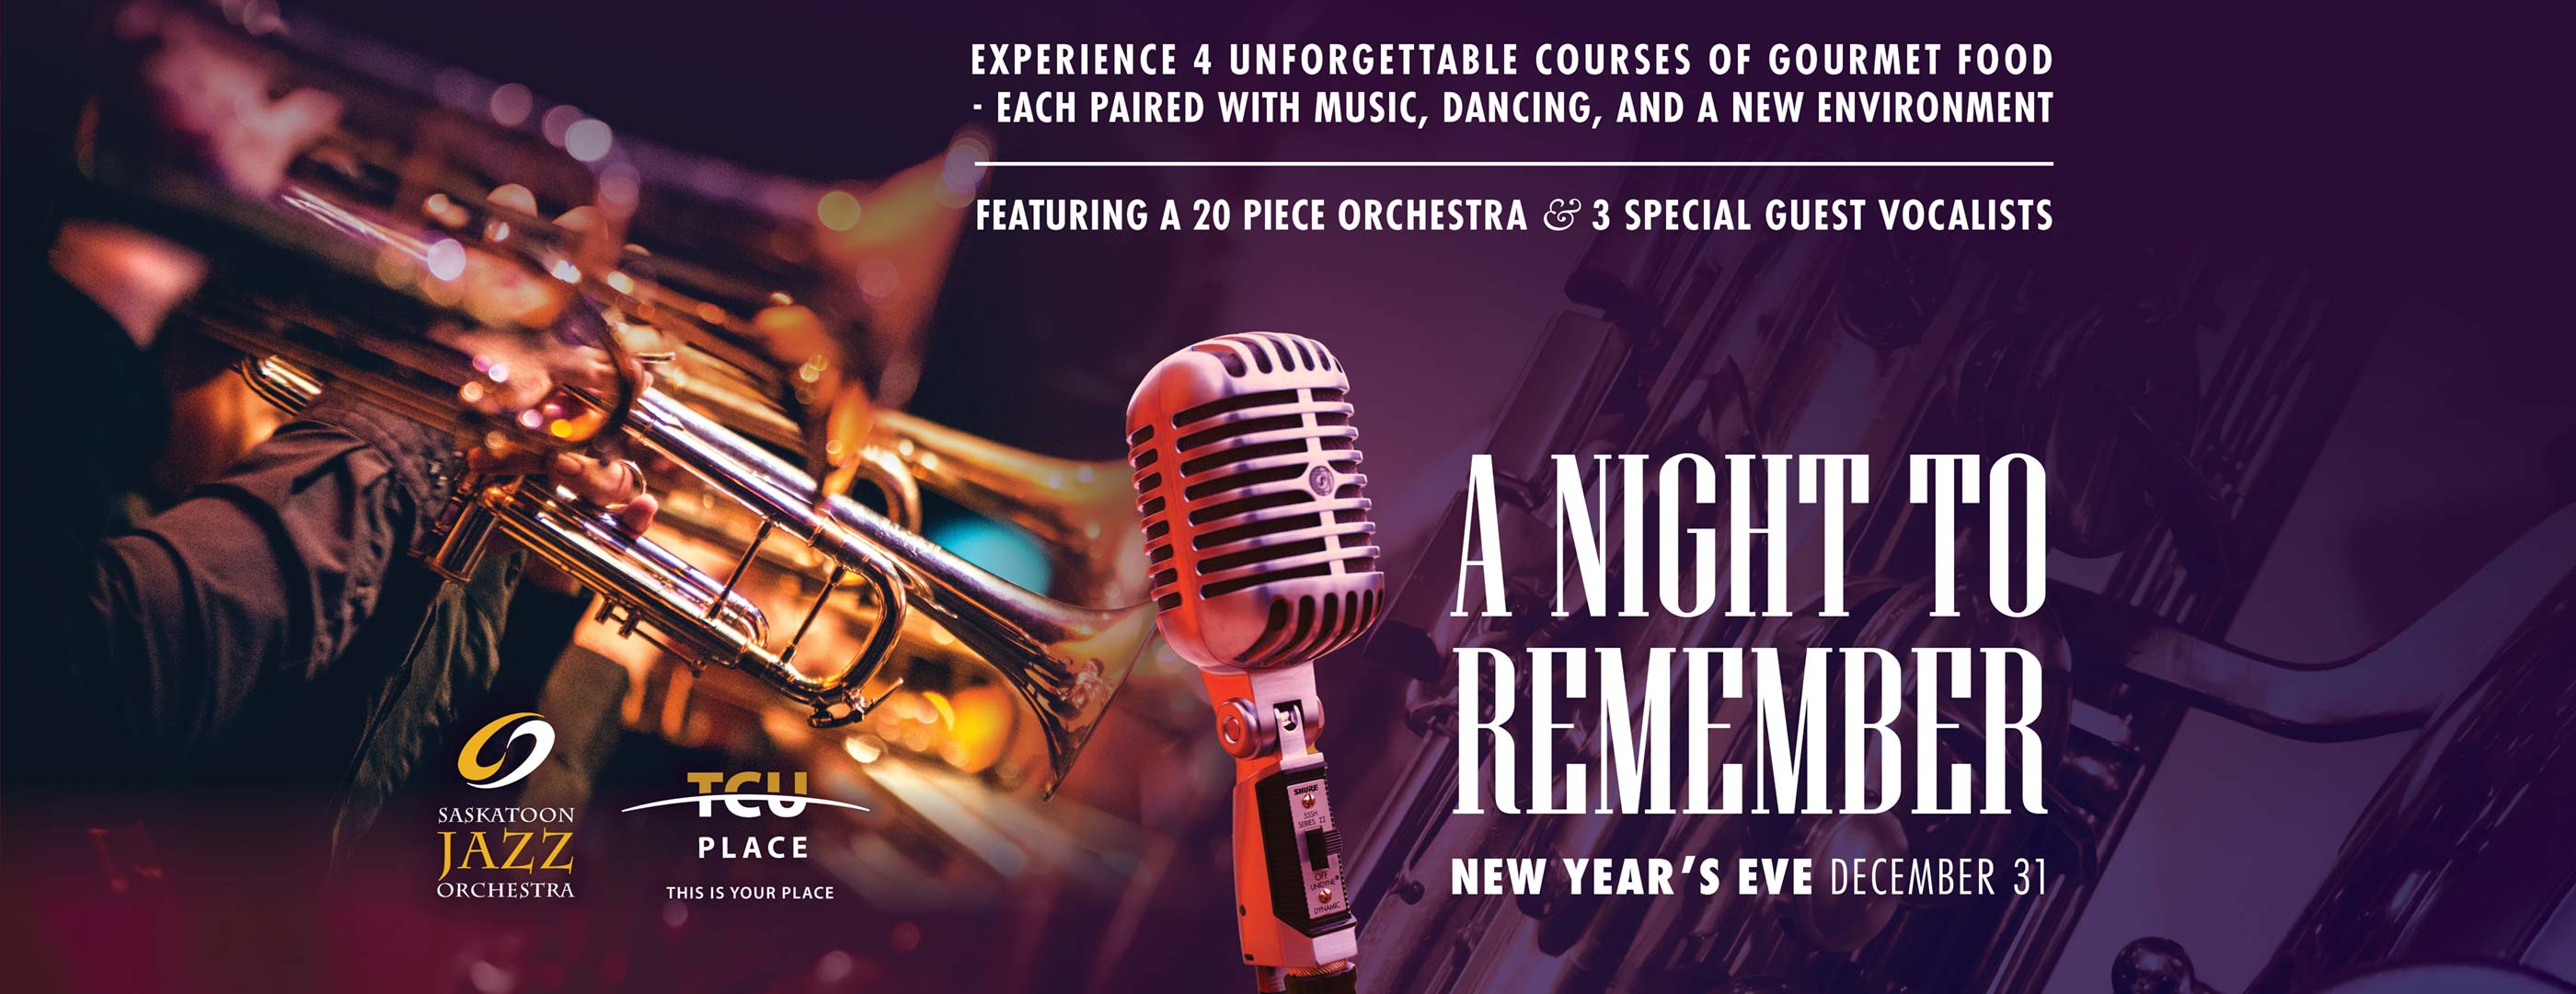 New Year's Eve - A Night To Remember